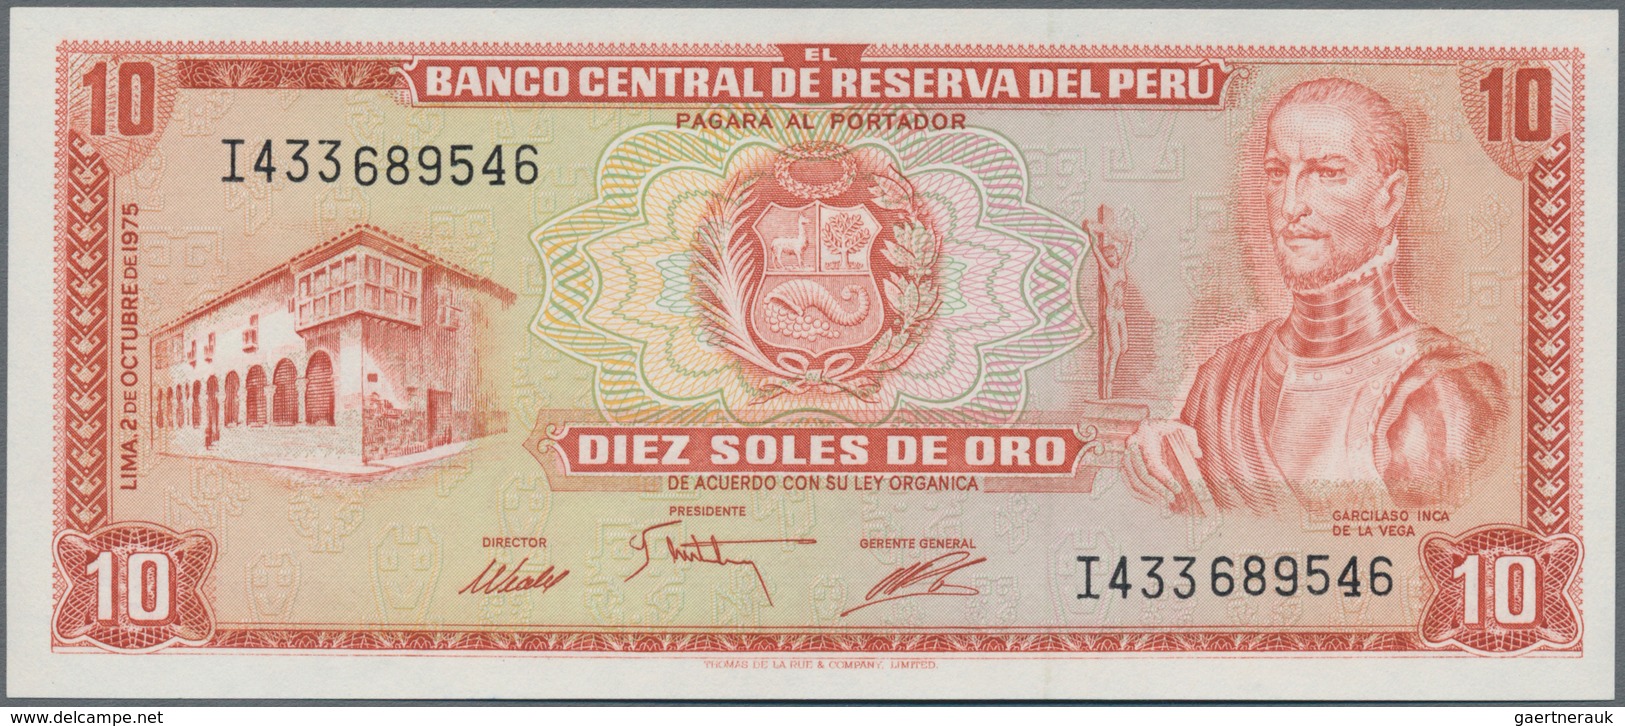 Peru: Huge lot with 41 banknotes 1921 – 1990 including for example ½ Libra and 1 Sol 1921 (VF, VF+),